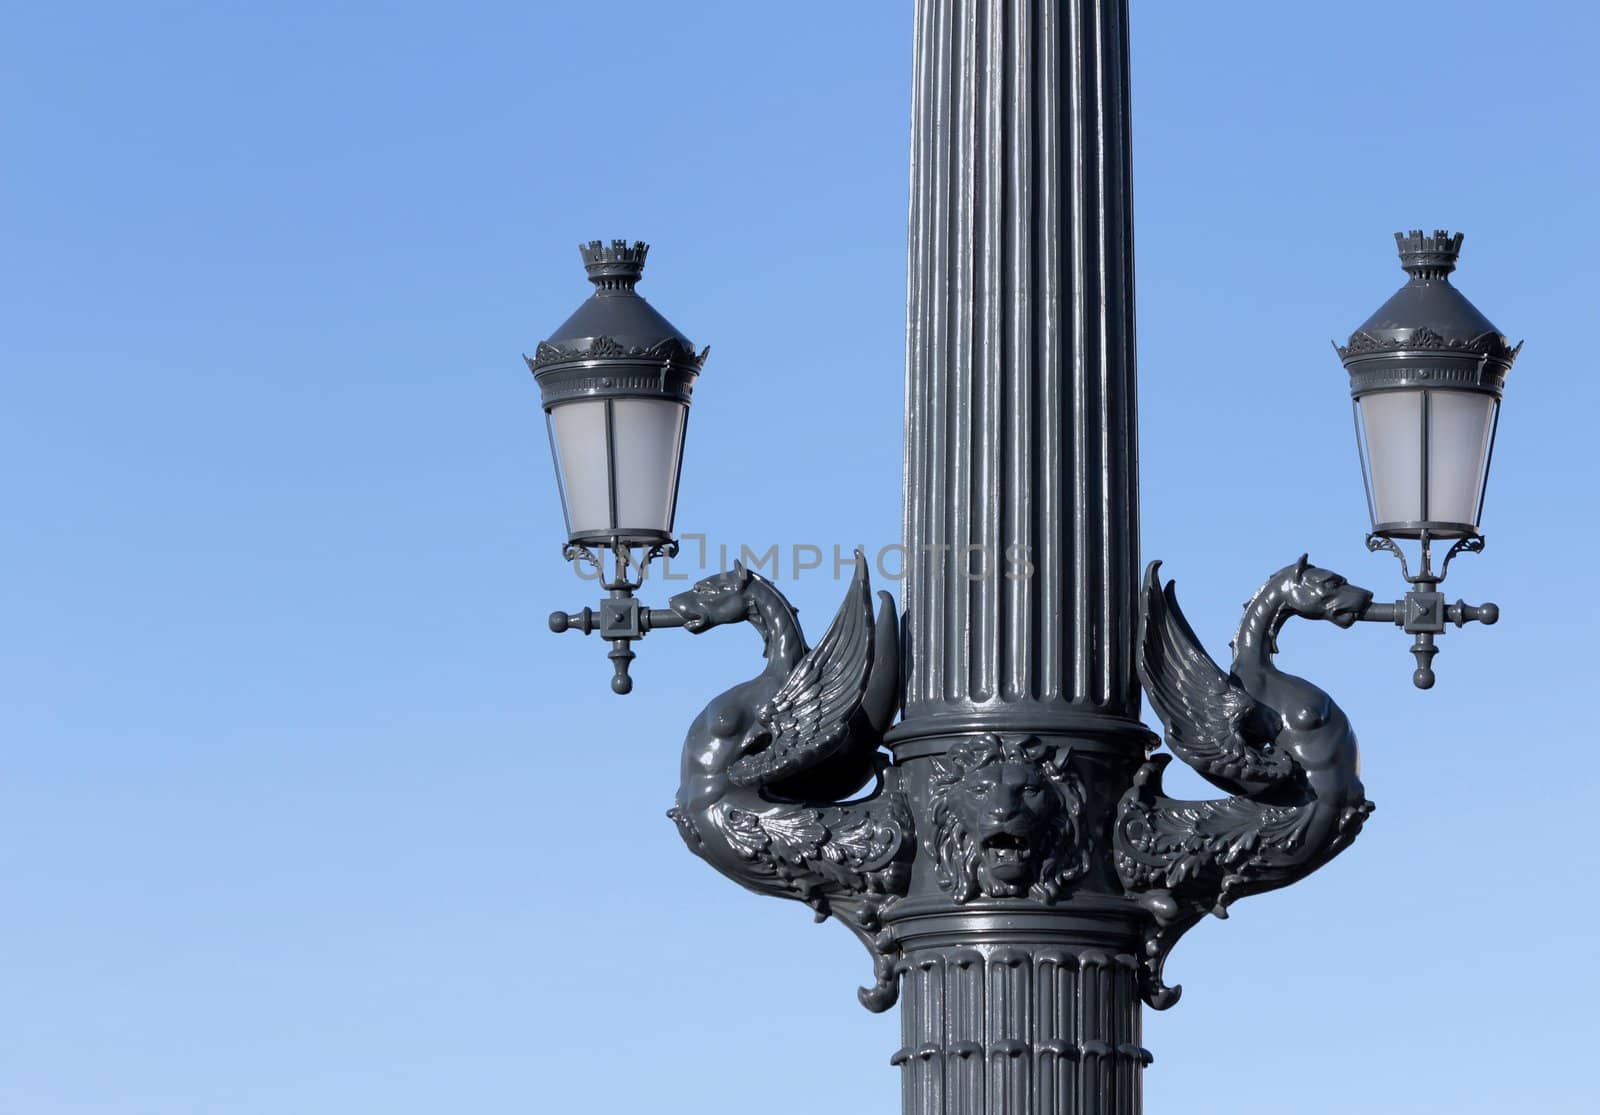 Double ornate street lamps.